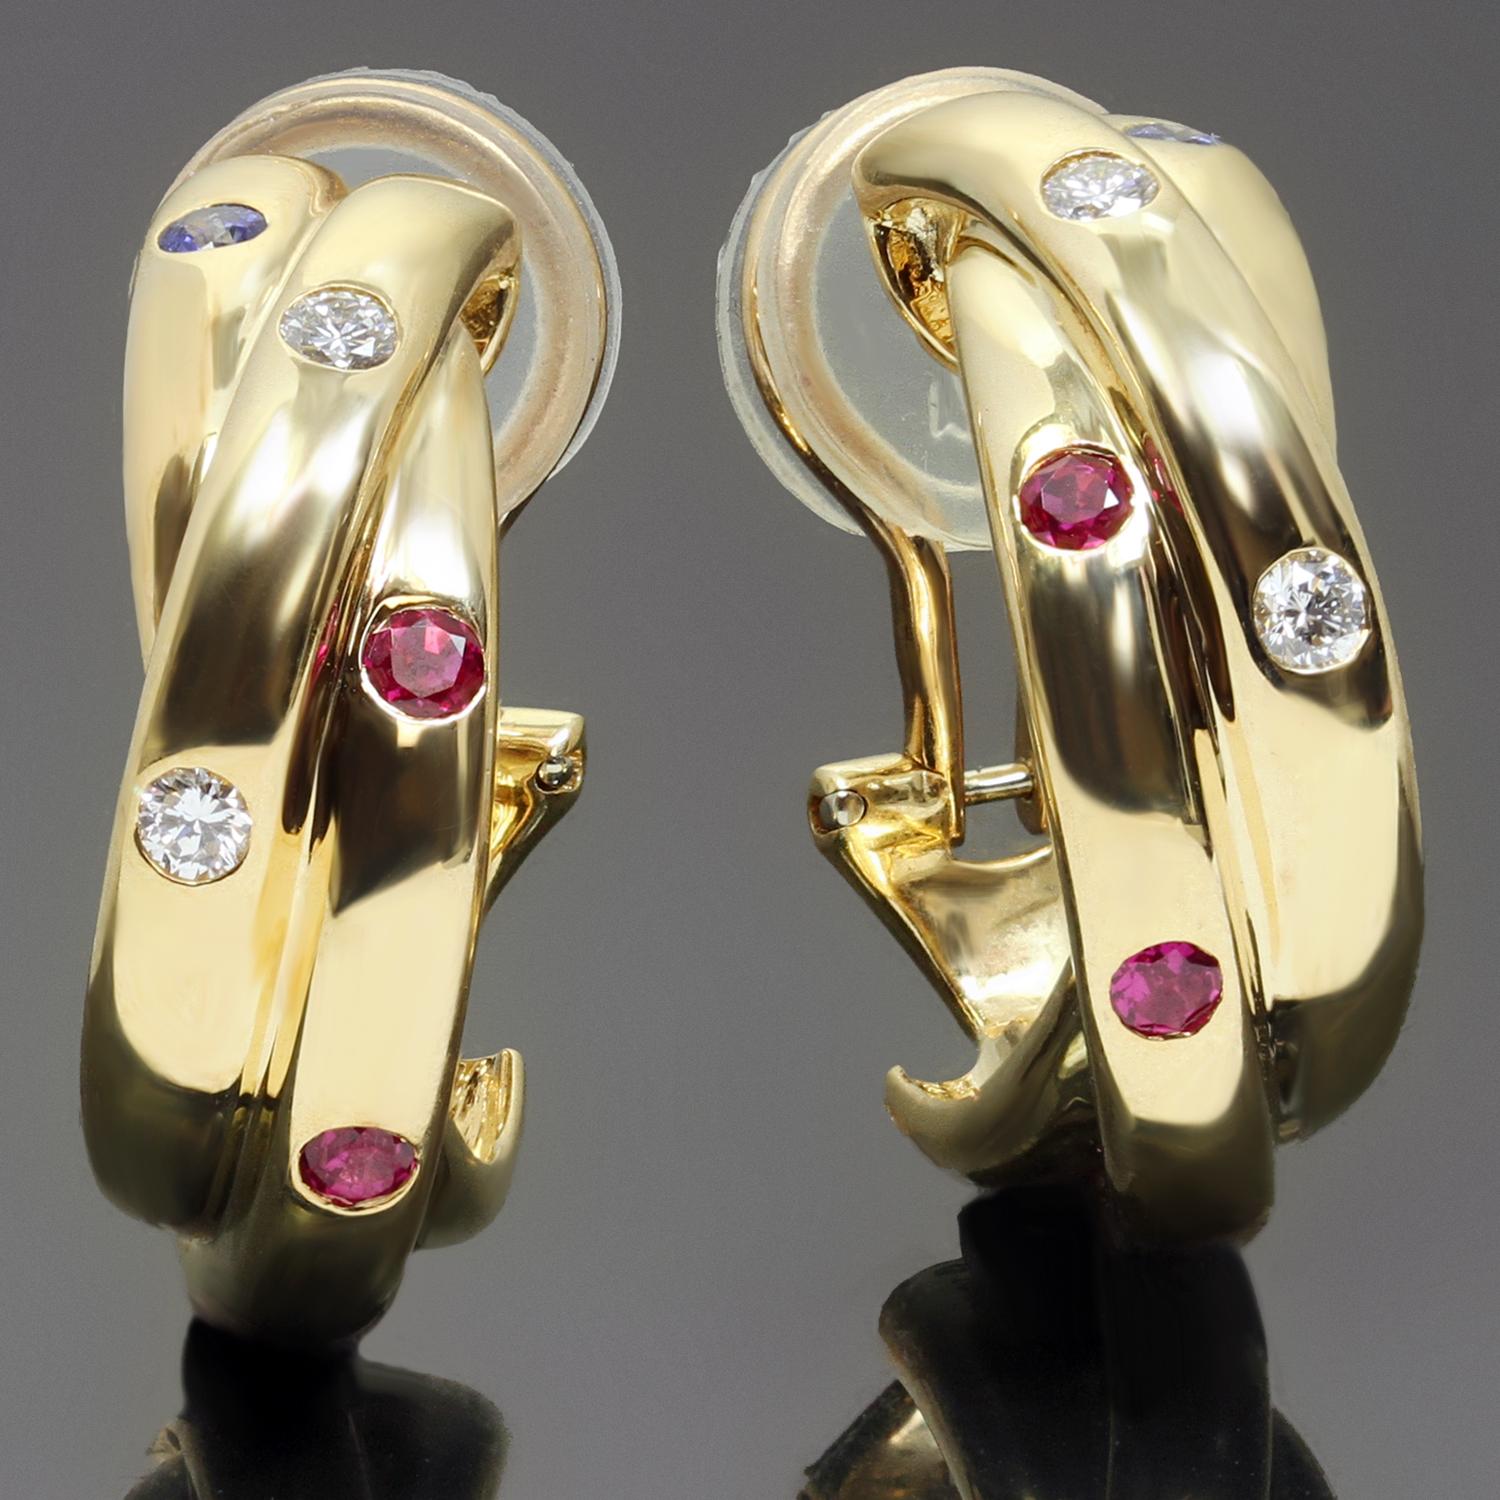 These gorgeous Cartier lever-back clip-on wrap earrings from the classic Constellation collection feature intertwined bands crafted in 18k yellow gold and set with red rubies, blue sapphires, and brilliant-cut round F-G VVS1-VVS2 diamonds weighing